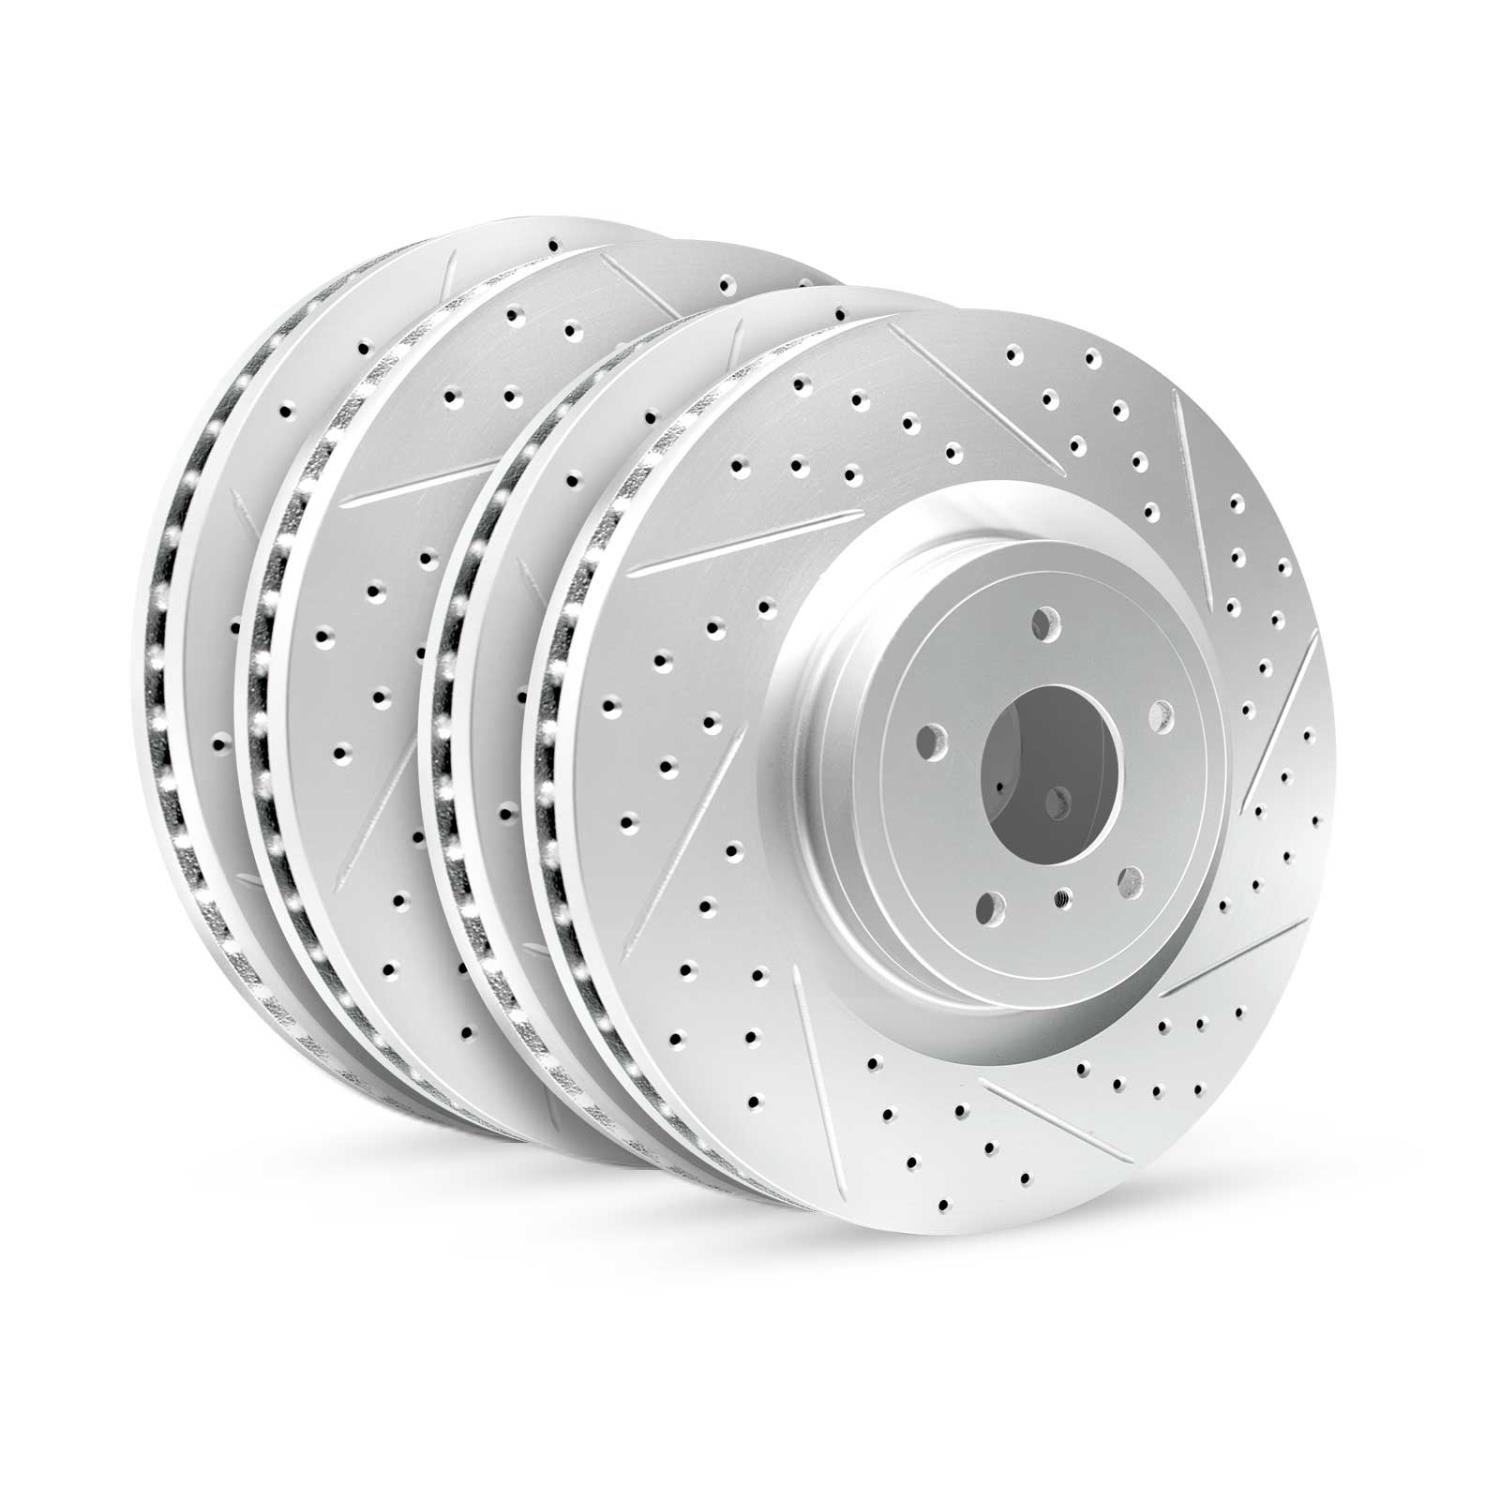 GEO-Carbon Drilled/Slotted Rotors, 2011-2019 Kia/Hyundai/Genesis, Position: Front/Rear